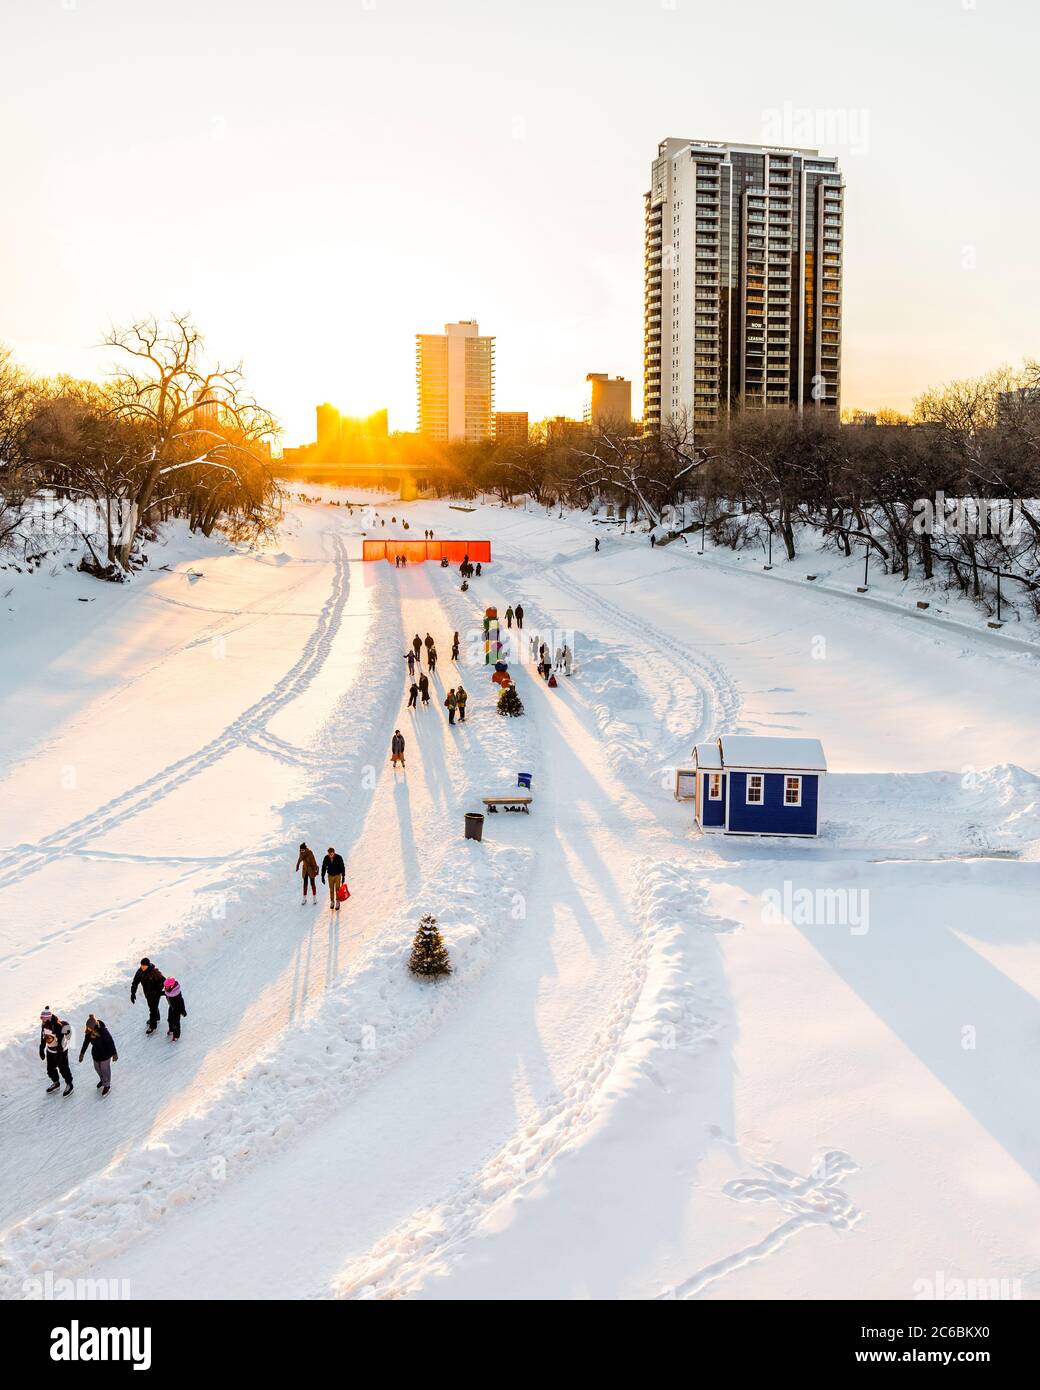 Ice skating on the Assiniboine River Trail at sunset, part of the Red River Mutual Trail, The Forks, Winnipeg, Manitoba, Canada. Stock Photo